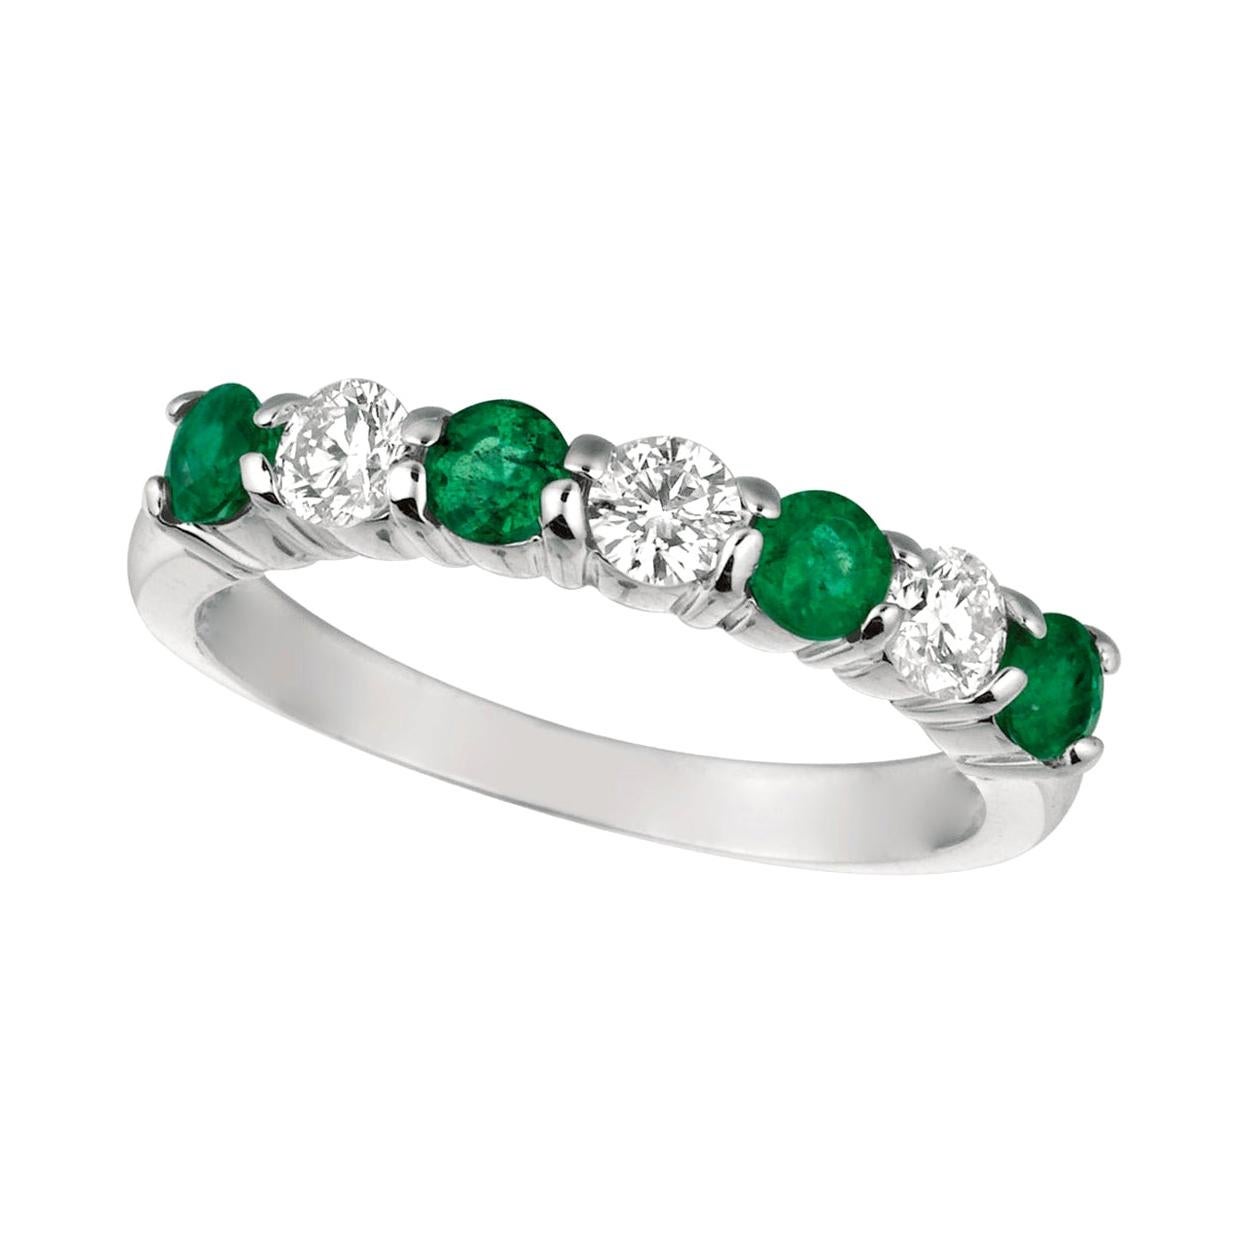 For Sale:  1.45 Carat Natural Diamond and Emerald 7-Stone Ring Band 14 Karat White Gold